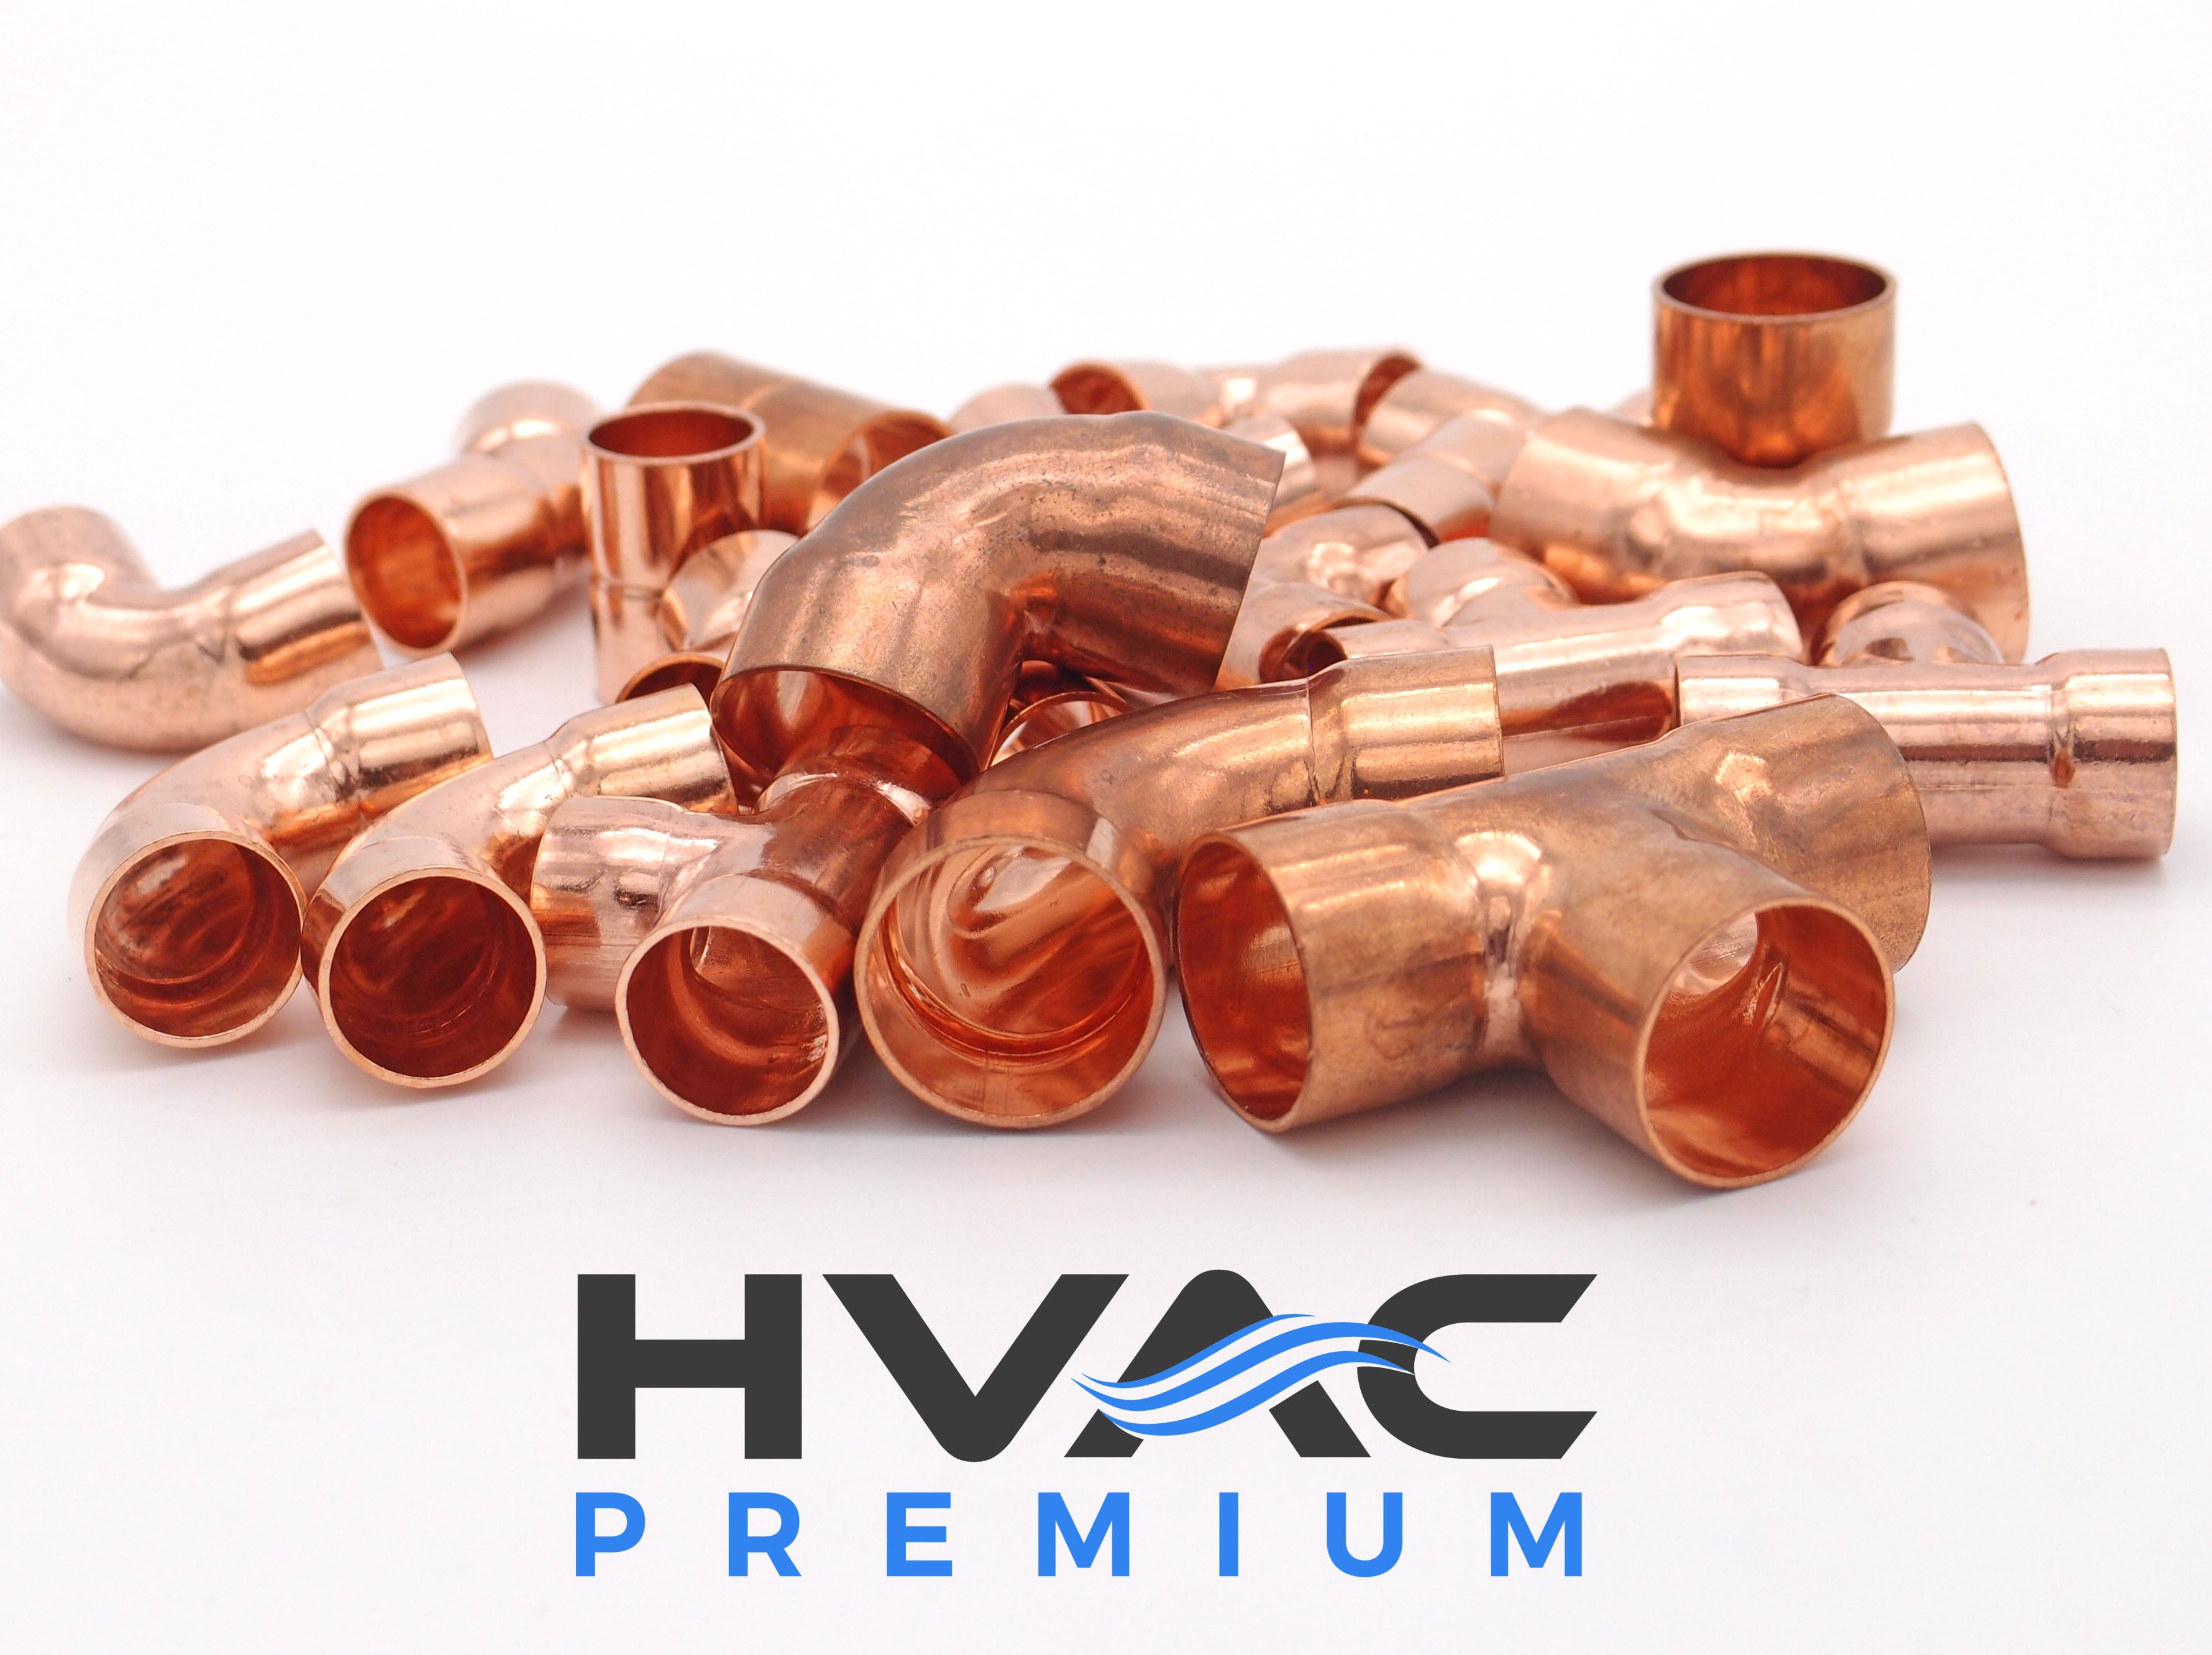 Copper Fitting 5/8 Inch (HVAC Outer Dimension) 1/2 Inch (Plumbing Inner Dimension) - Straight Copper Coupling Fittings With Rolled Tube Stop & HVAC – 99.9% Pure Copper - 10 Pack